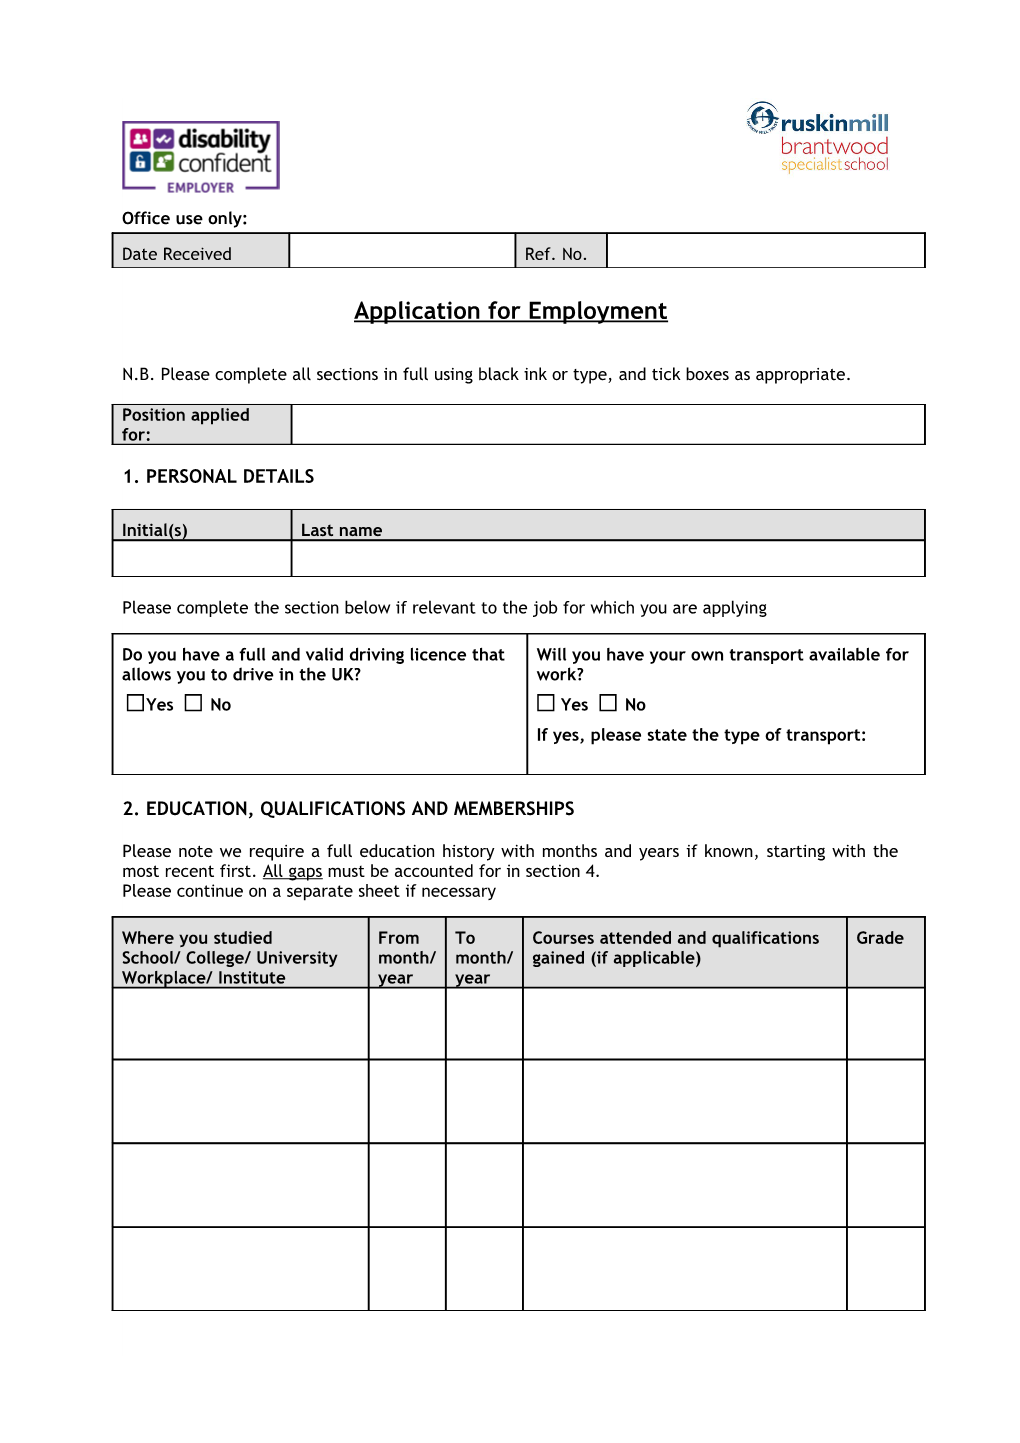 Application for Employment s192